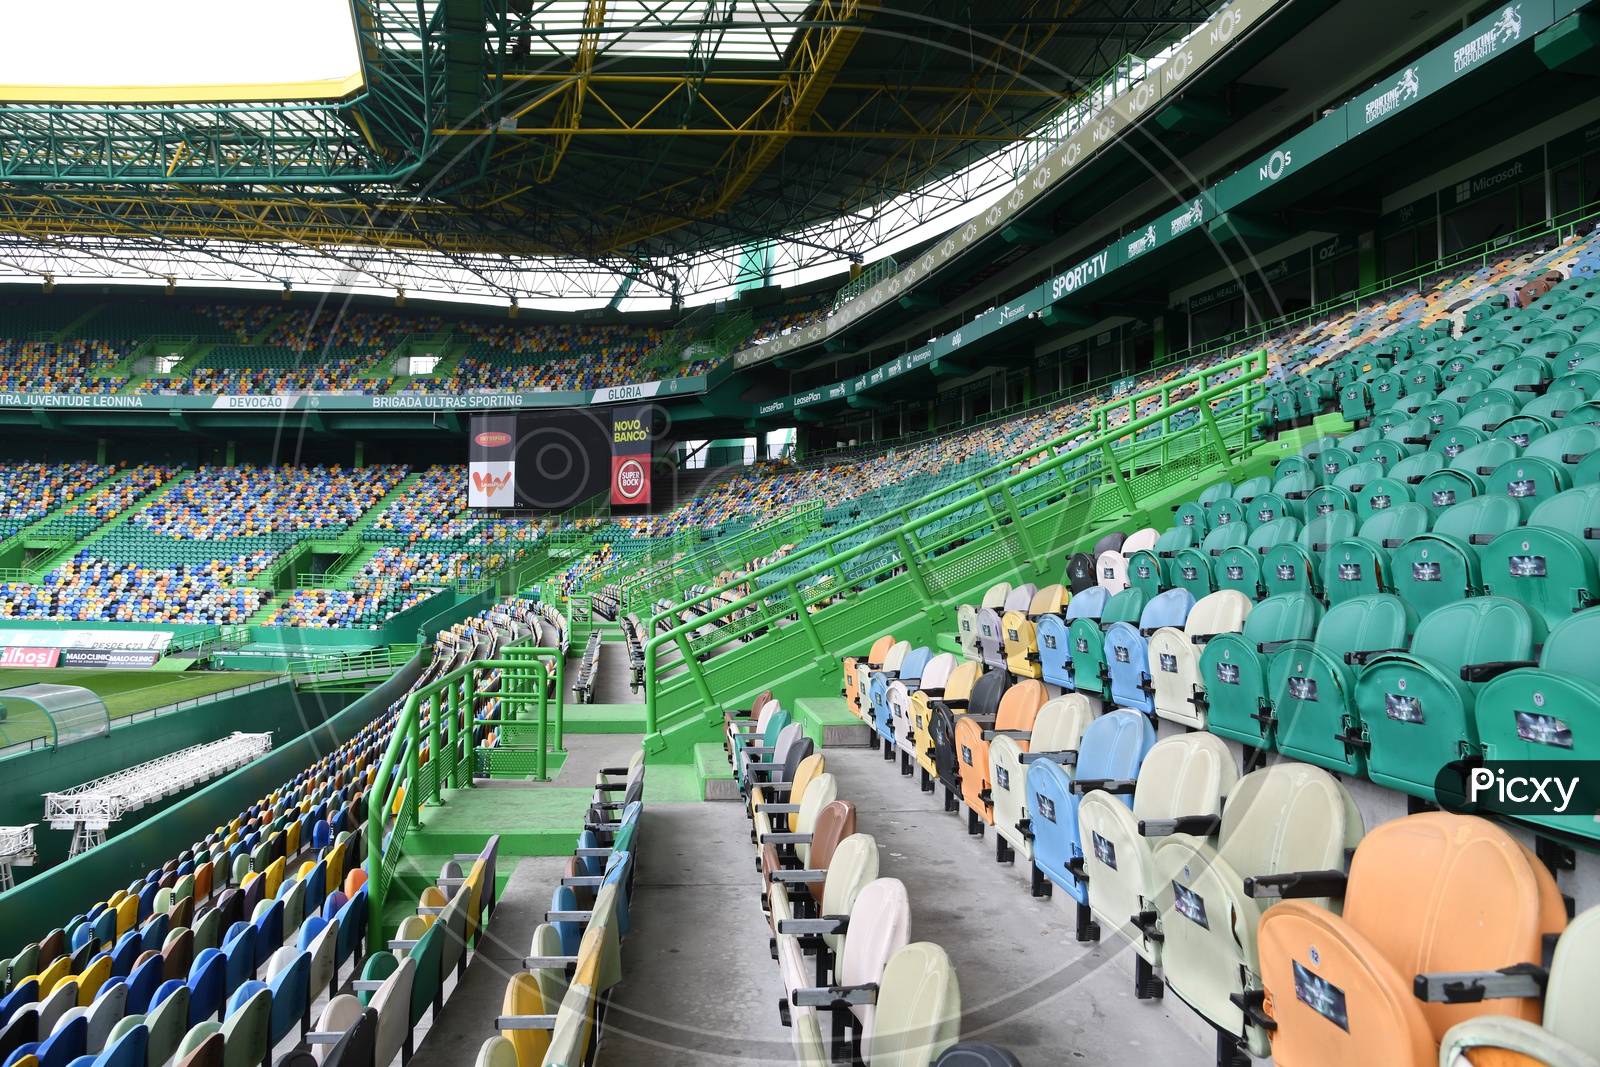 Chairs  In Rows At a Stadium